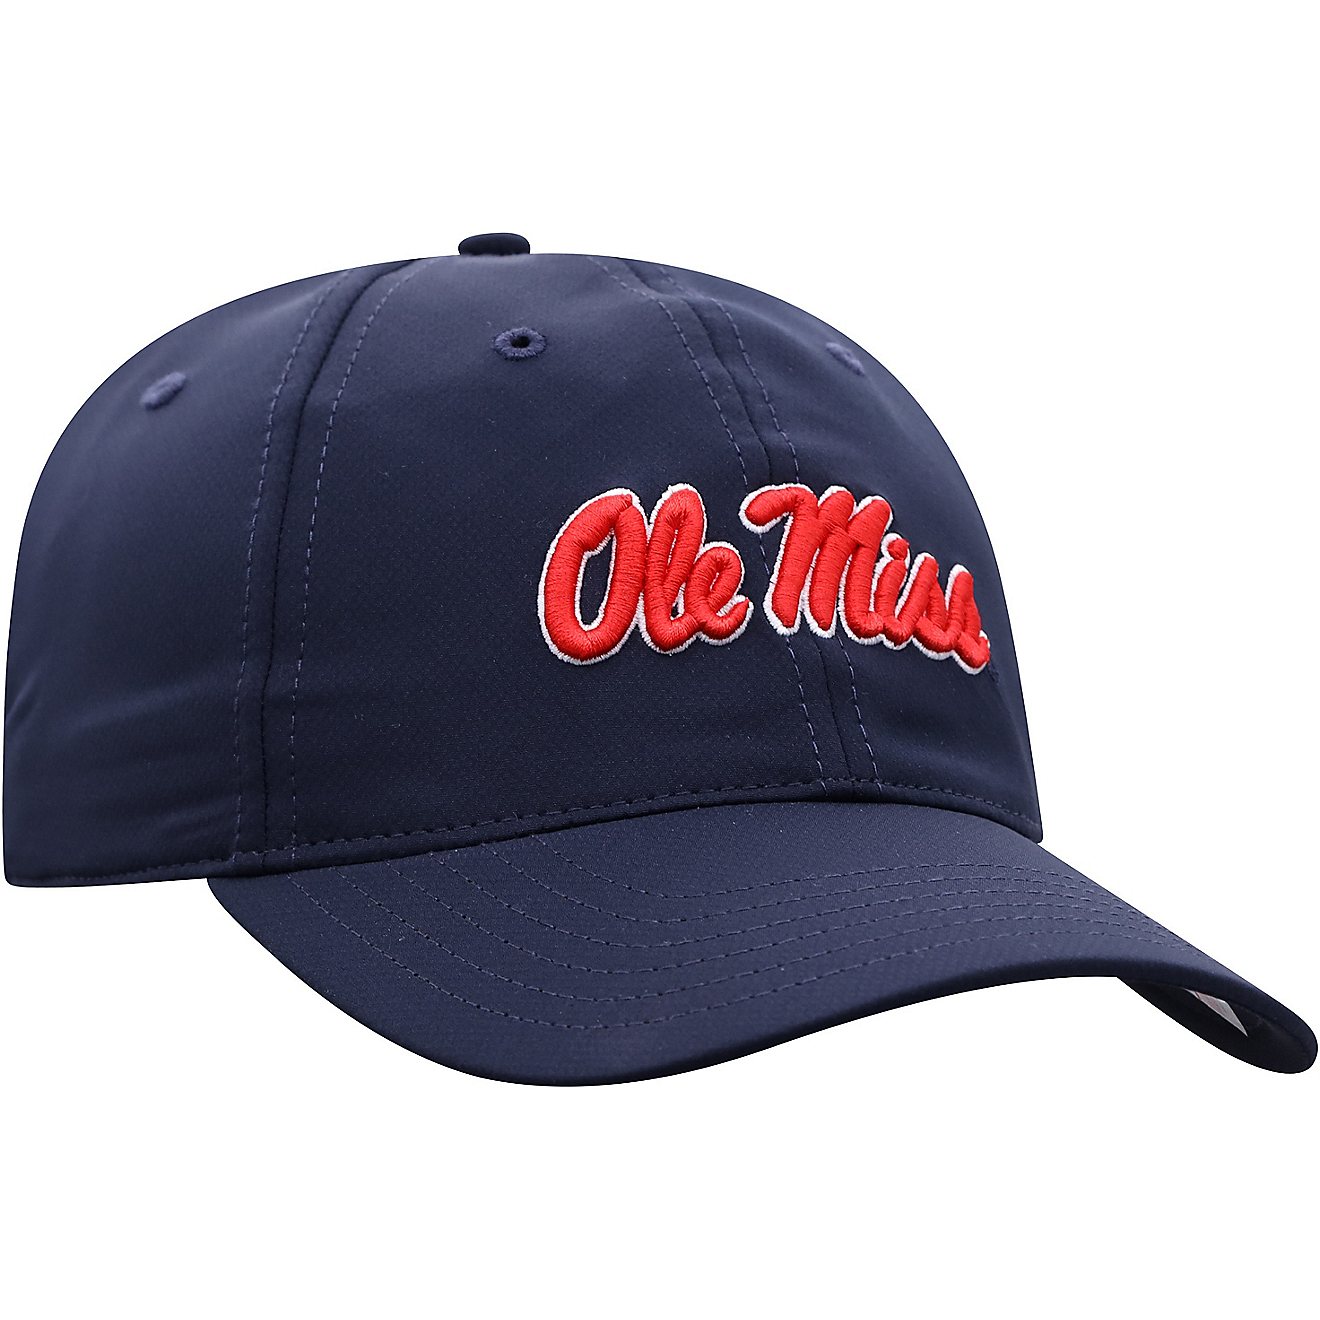 Top of the World University of Mississippi Trainer 20 Adjustable Cap                                                             - view number 4